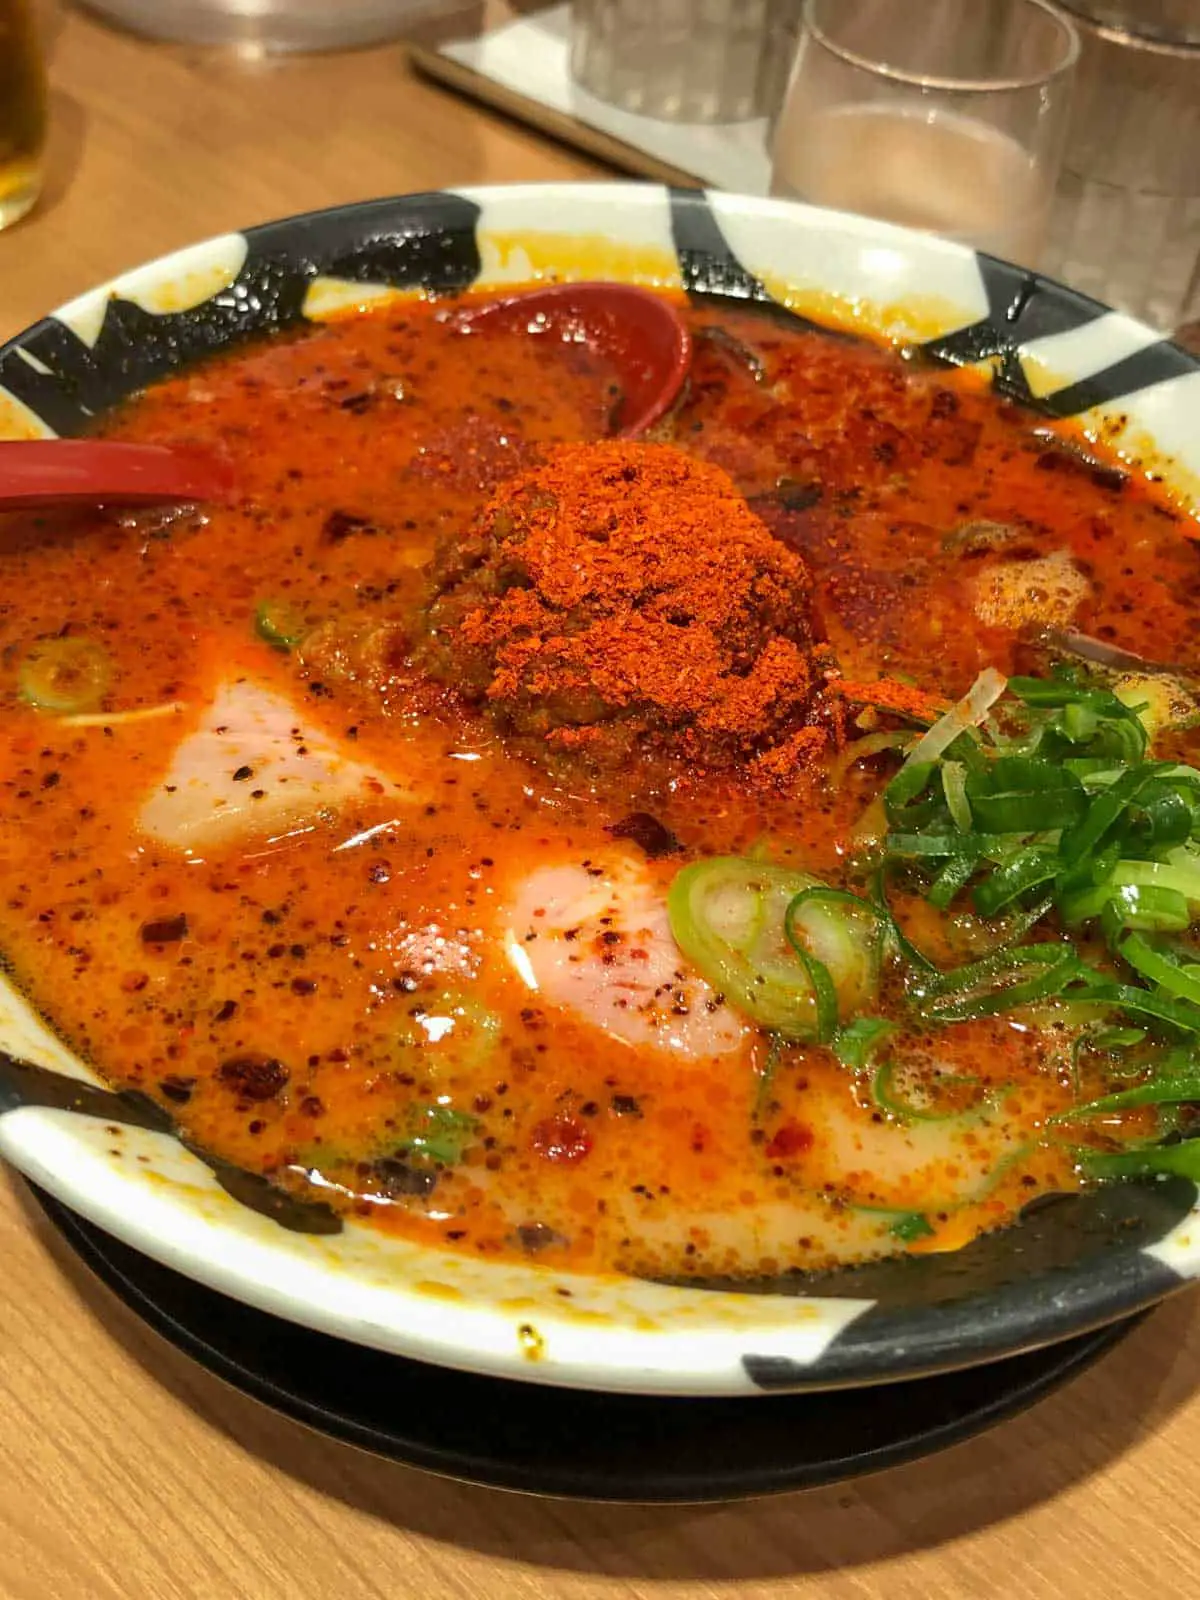 A bowl of super hot ramen with loads of red chili powder and sliced green onions. There is a red spoon resting in the bowl.